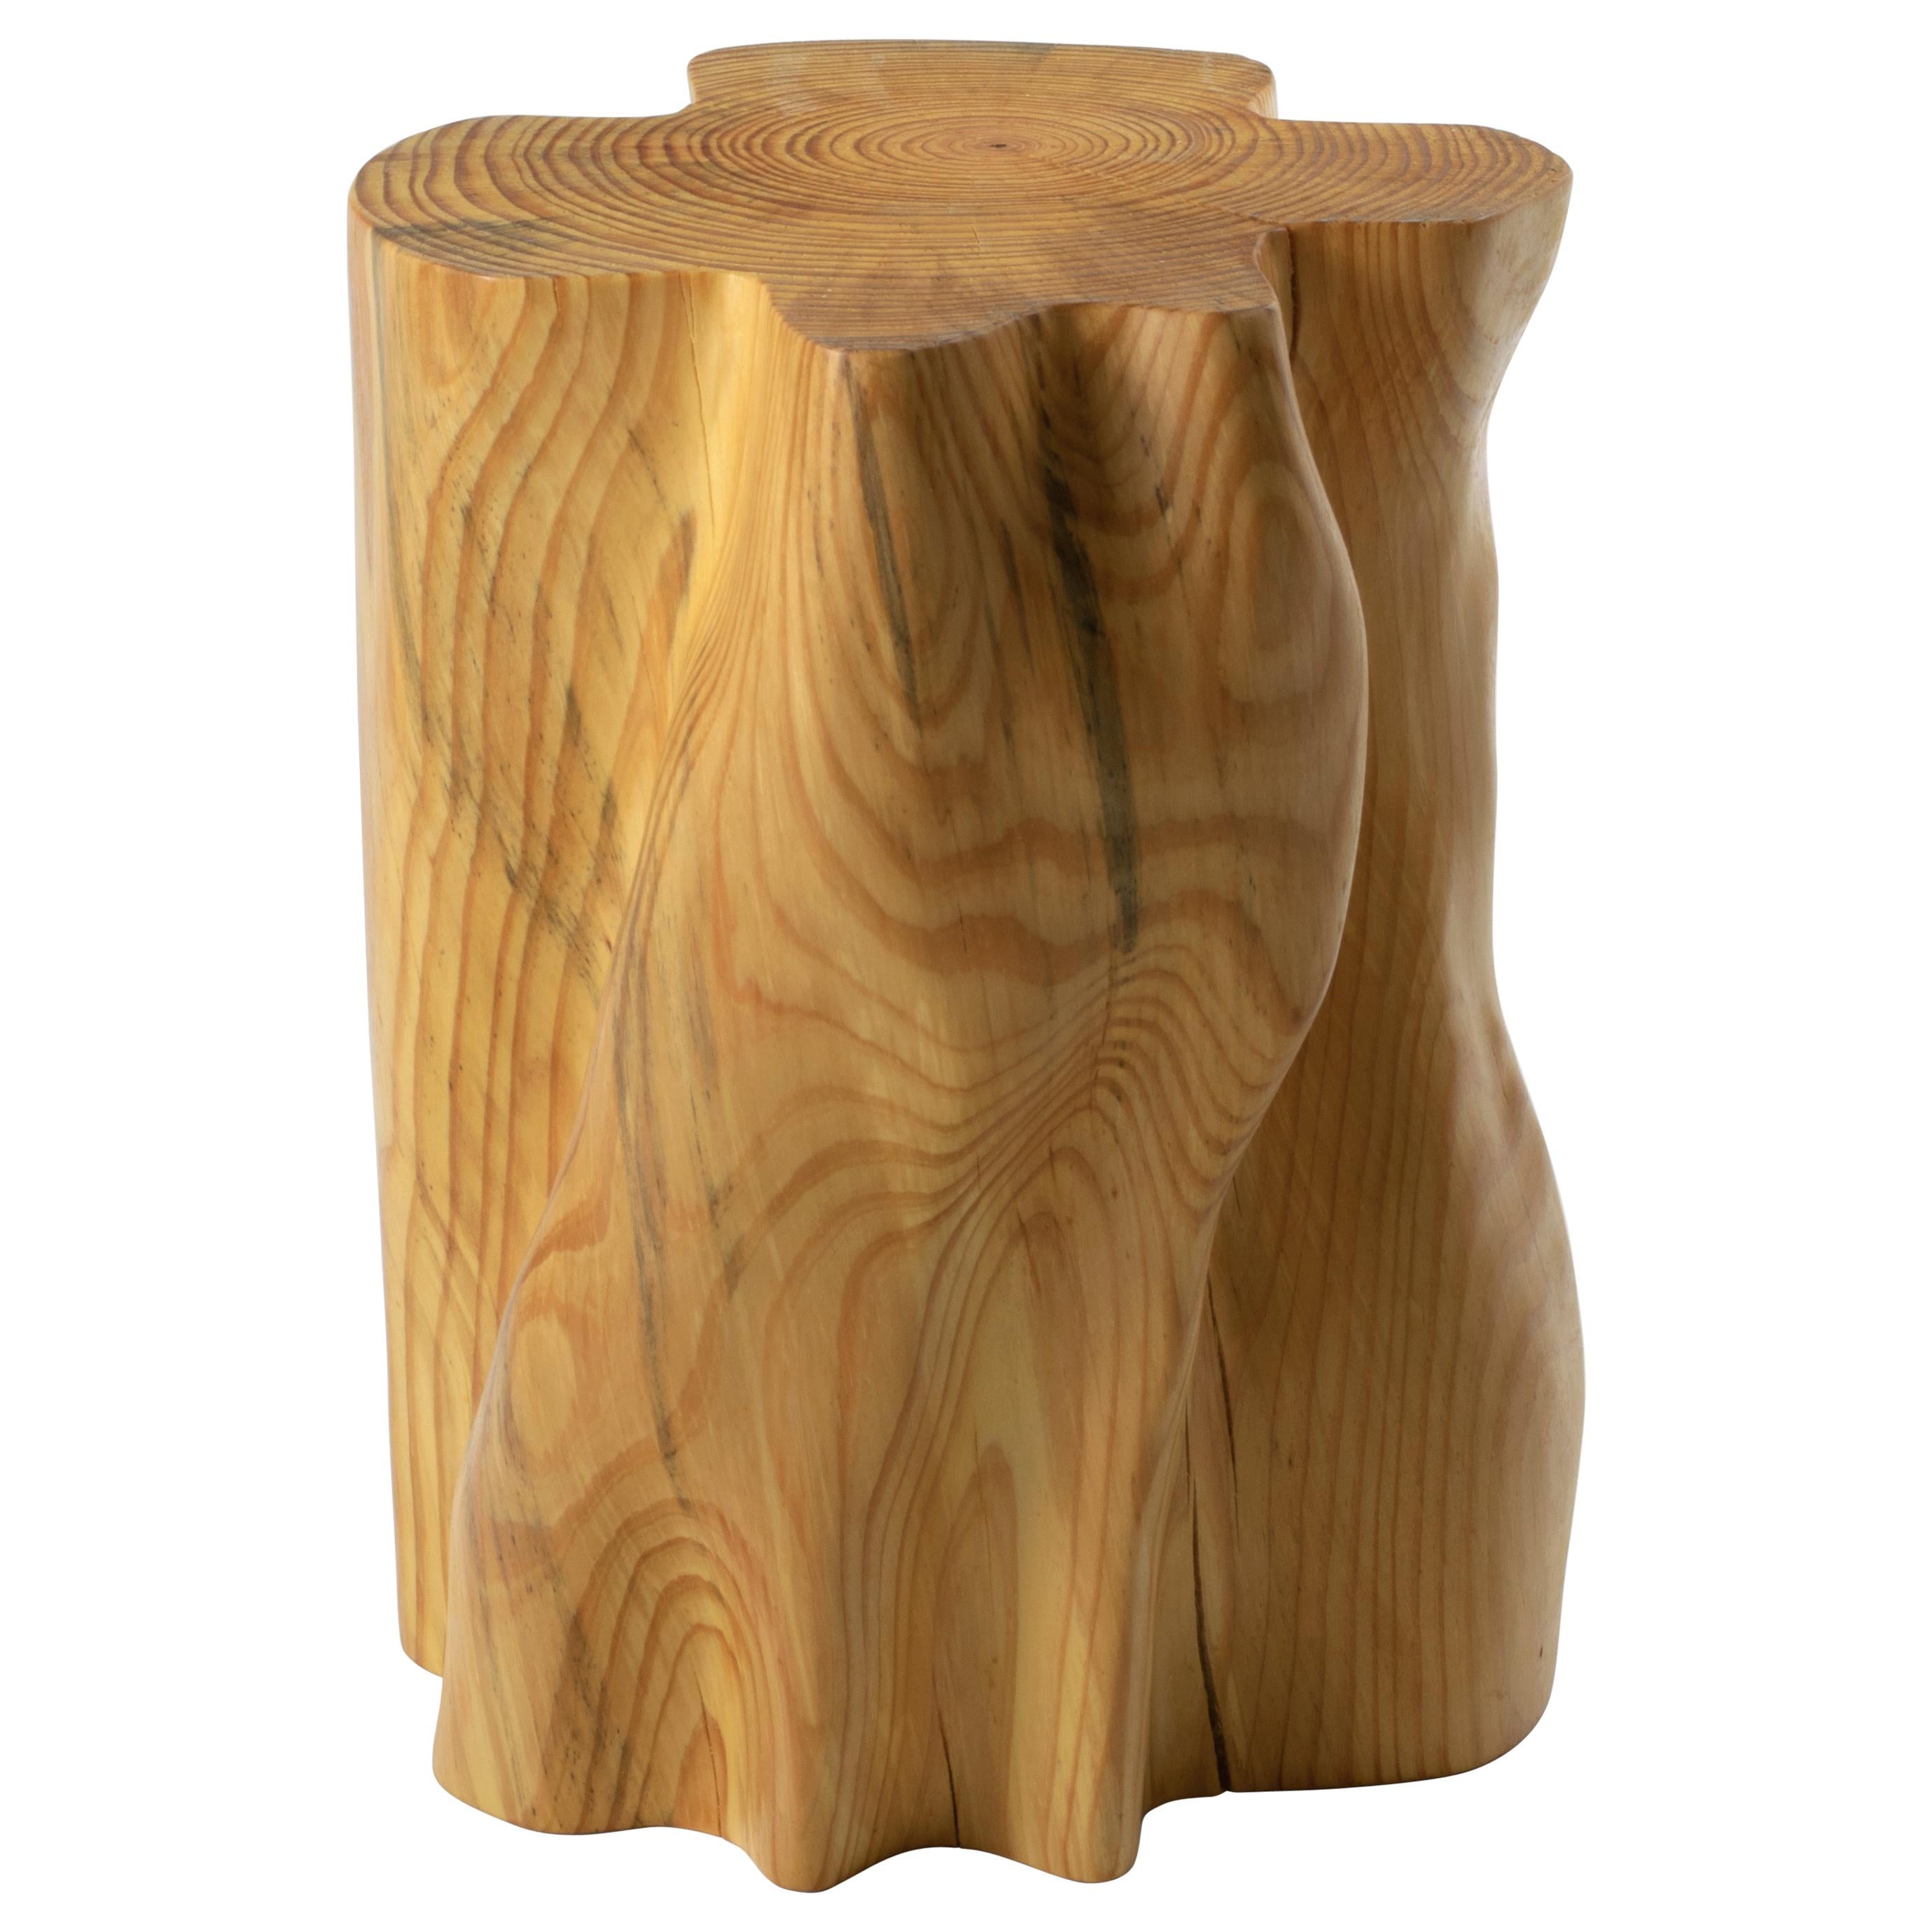 Bark Scale Stool #IV by Timbur, Represented by Tuleste Factory